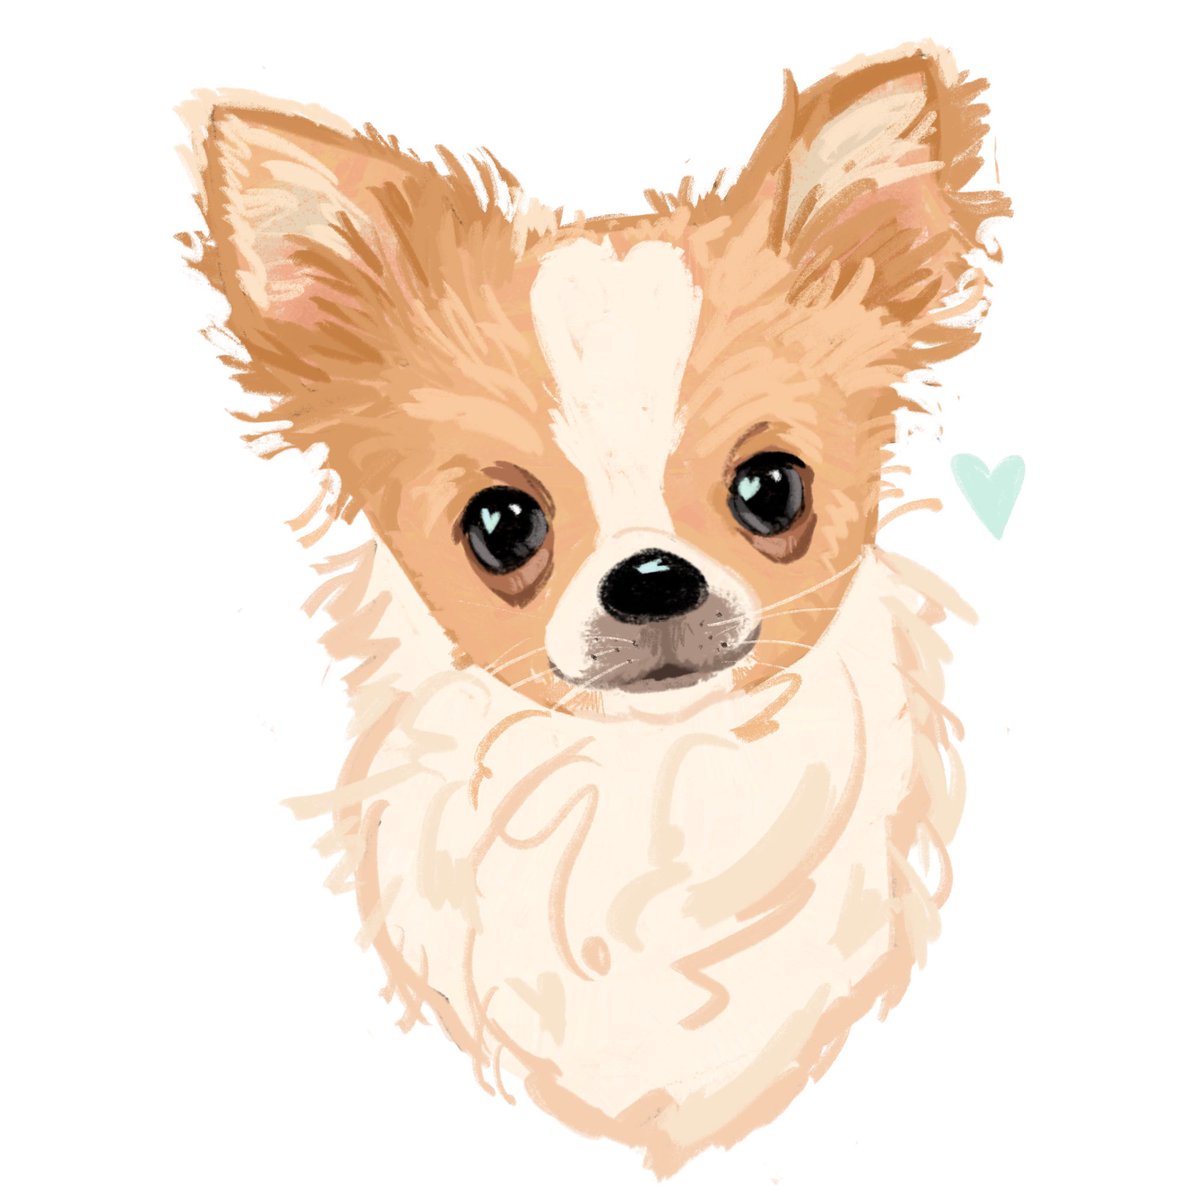 「Pet portraits will be open again in Marc」|🌈⭐Diana TS @ new patreon slots☀️🌈のイラスト